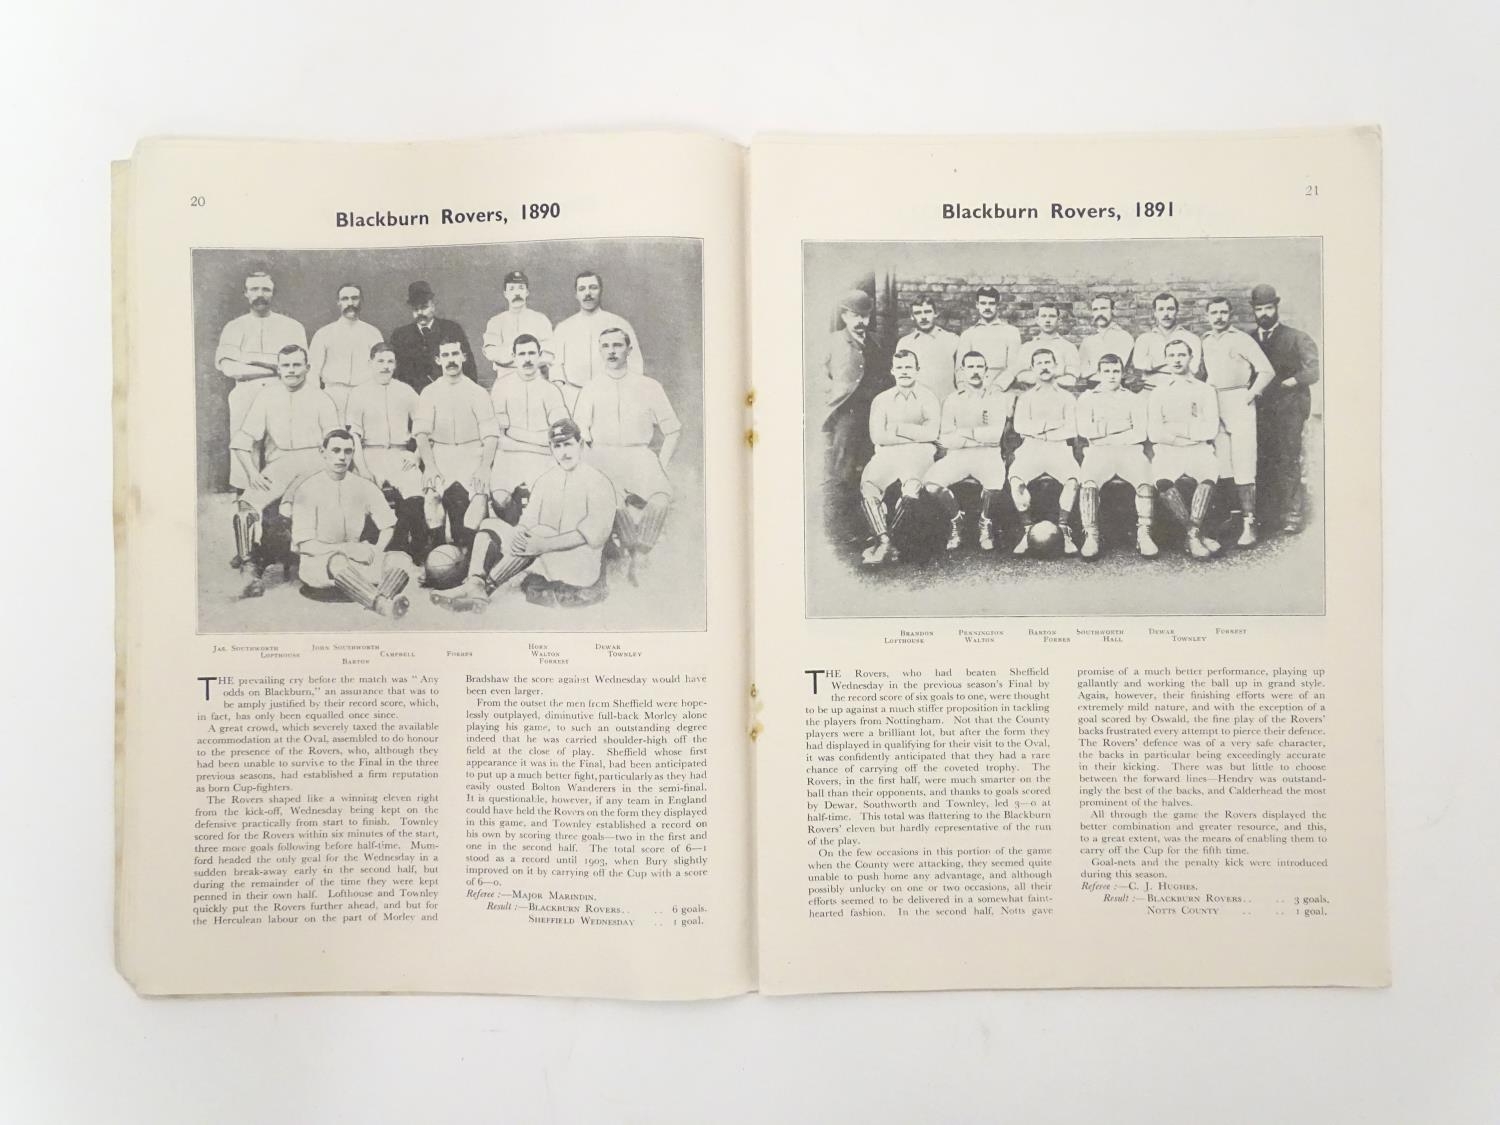 Book, sporting interest: The FA Cup Annual, King George V jubilee edition 1935, chronicling the - Image 6 of 7